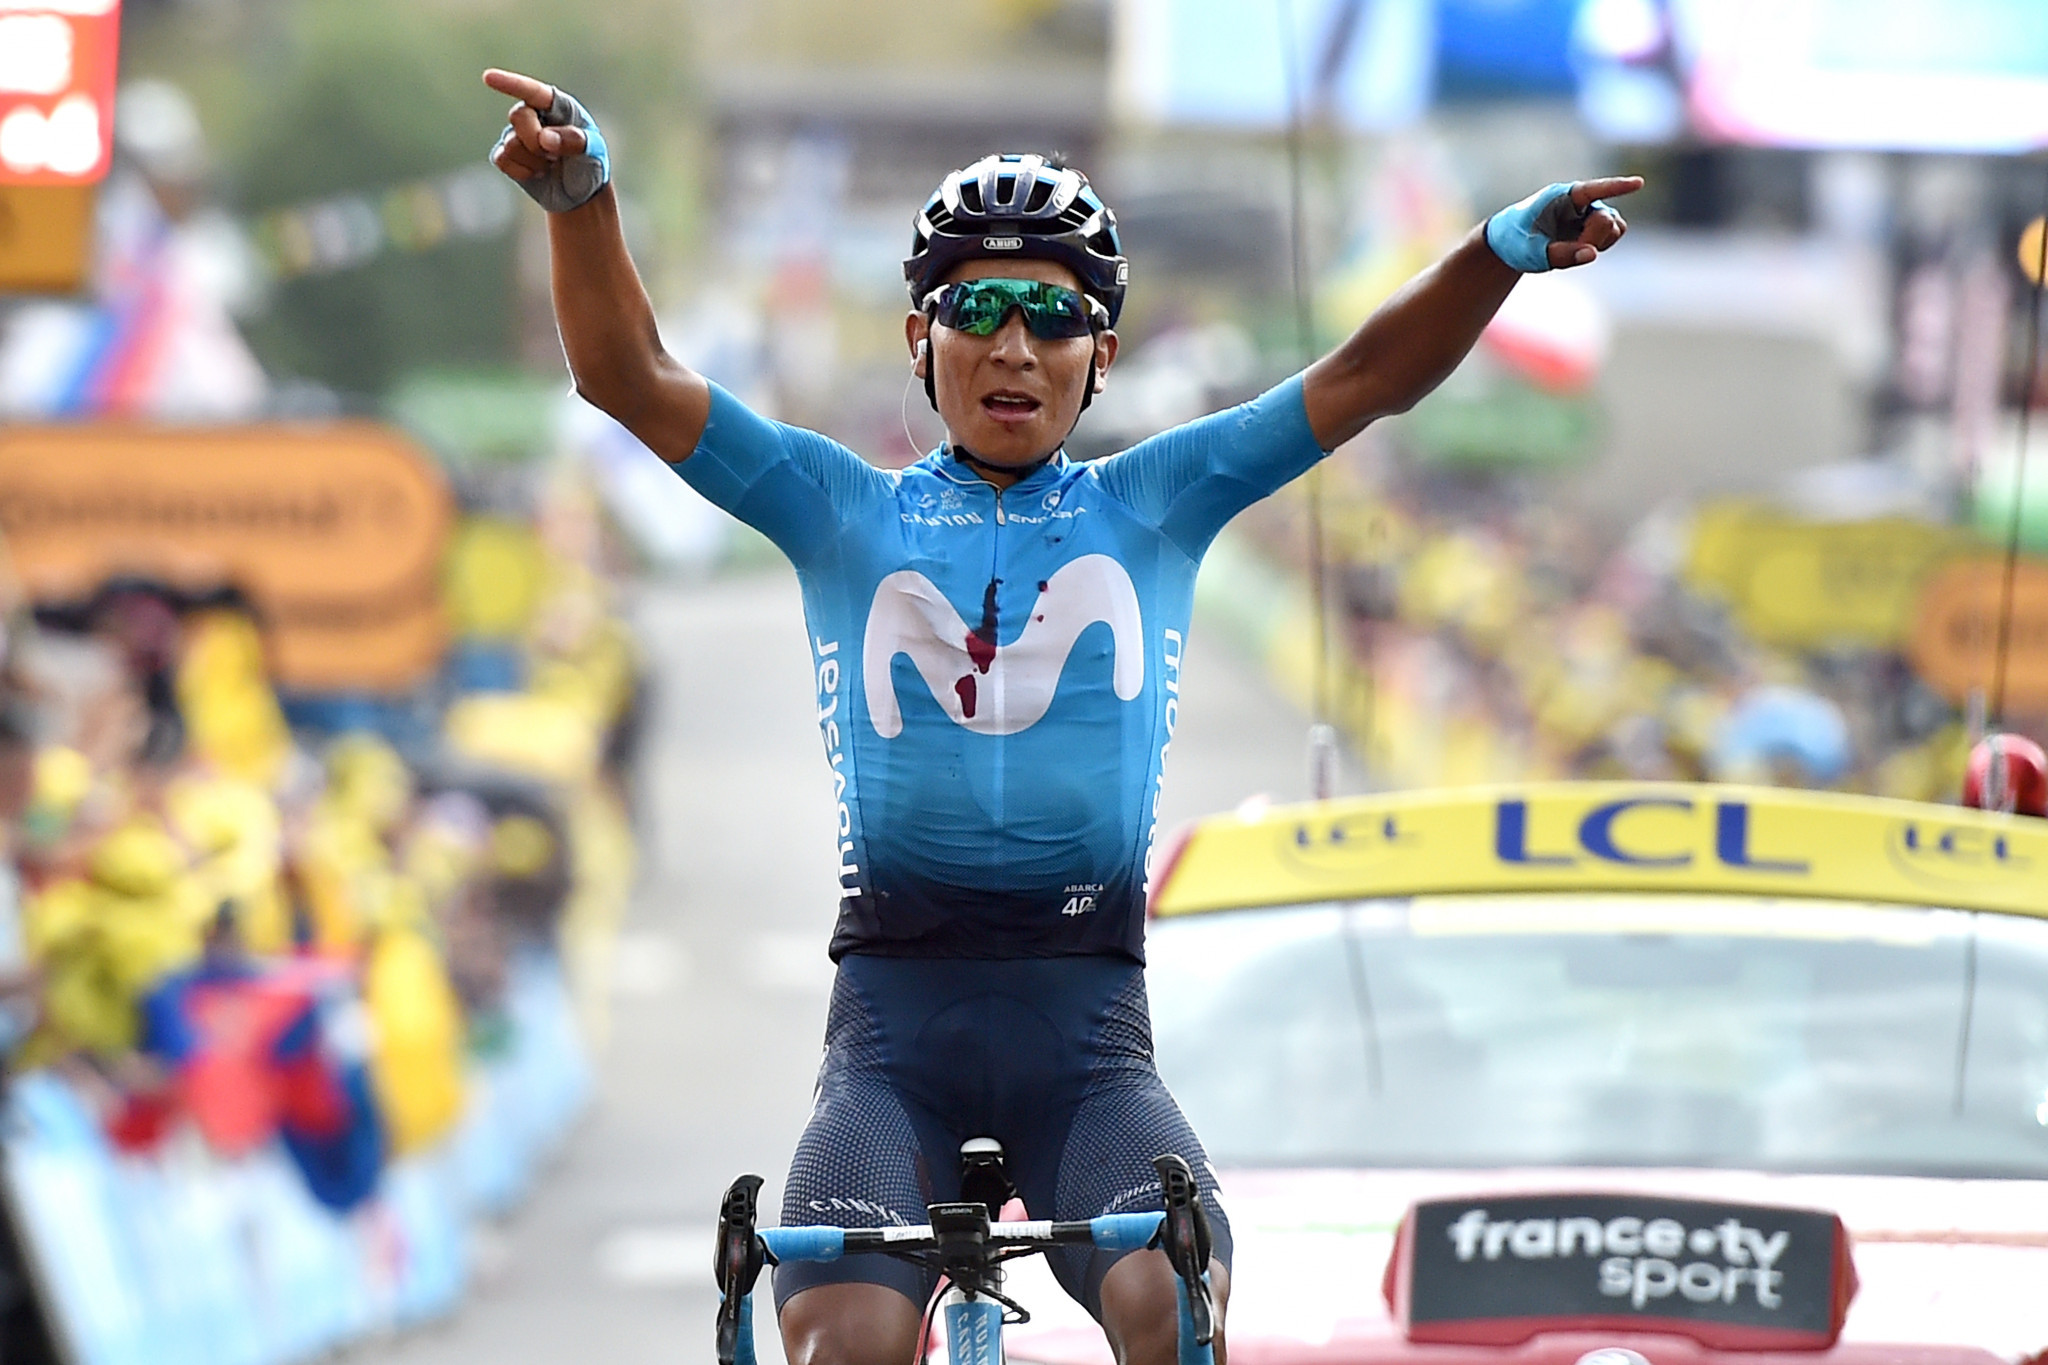 Nairo Quintana will be seeking a second title ©Getty Images